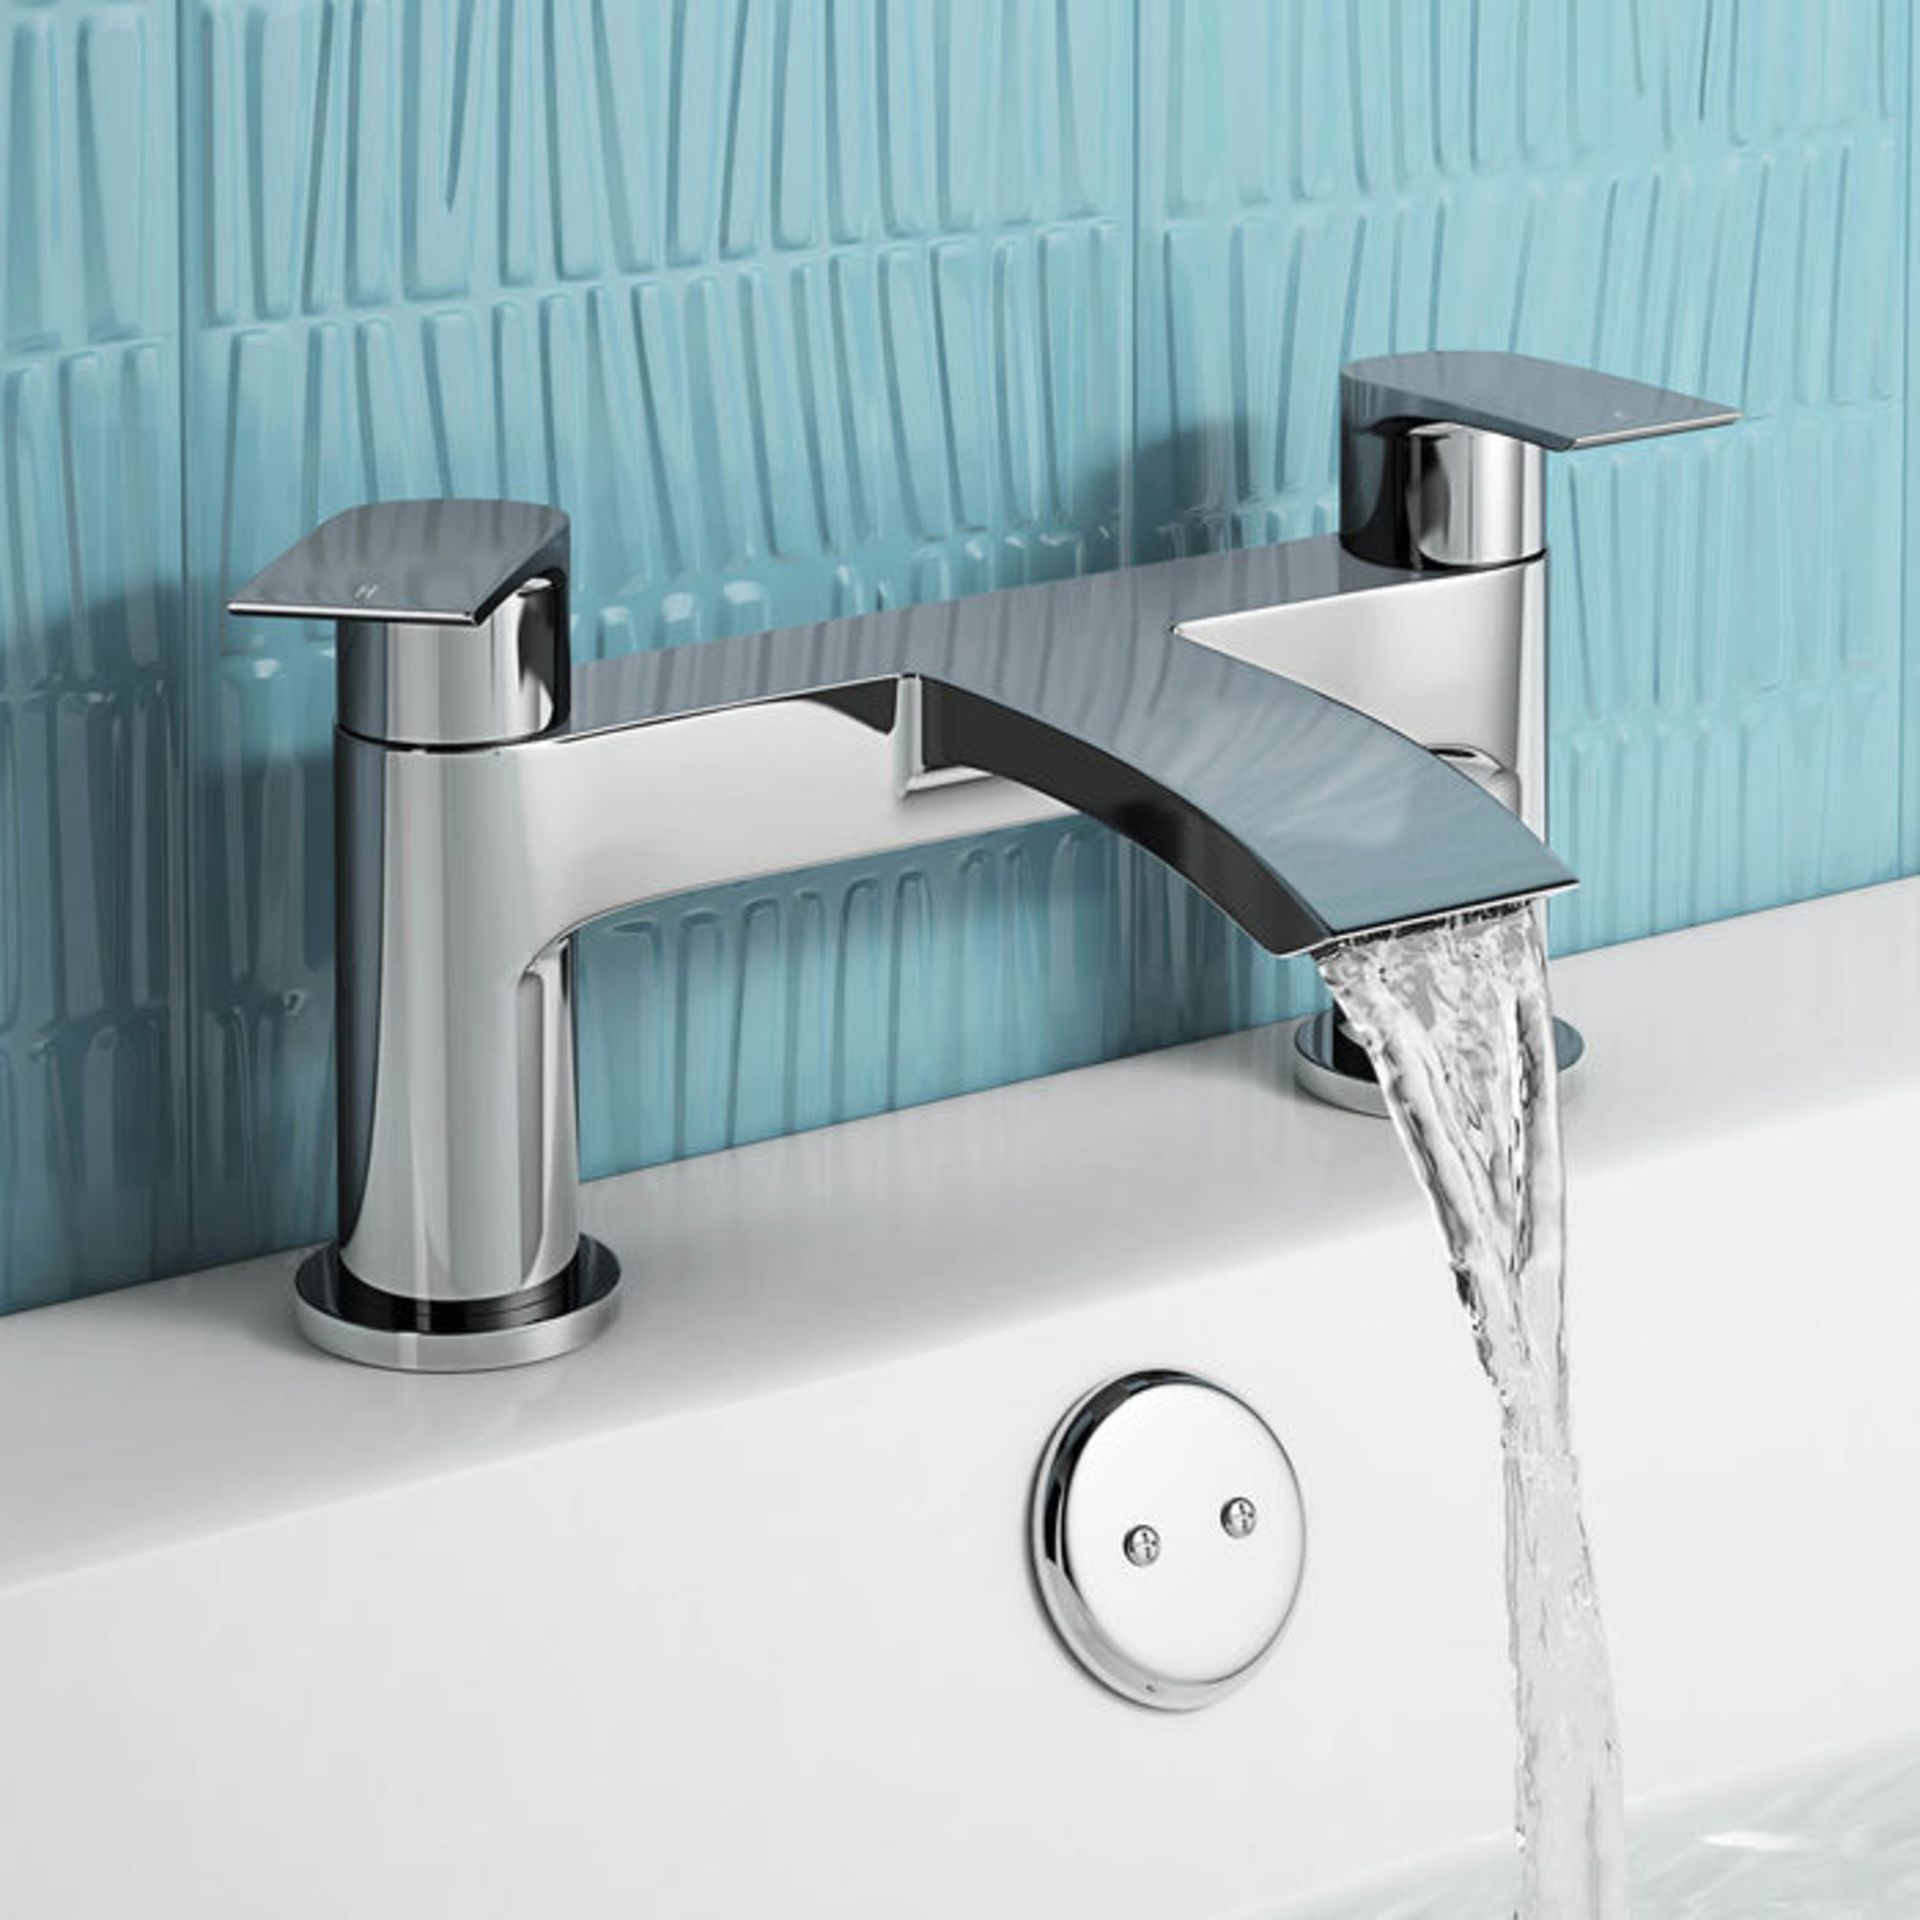 (PJ130) Melbourne Bath Filler Mixer Tap Chrome Plated Solid Brass 1/4 turn solid brass valve with